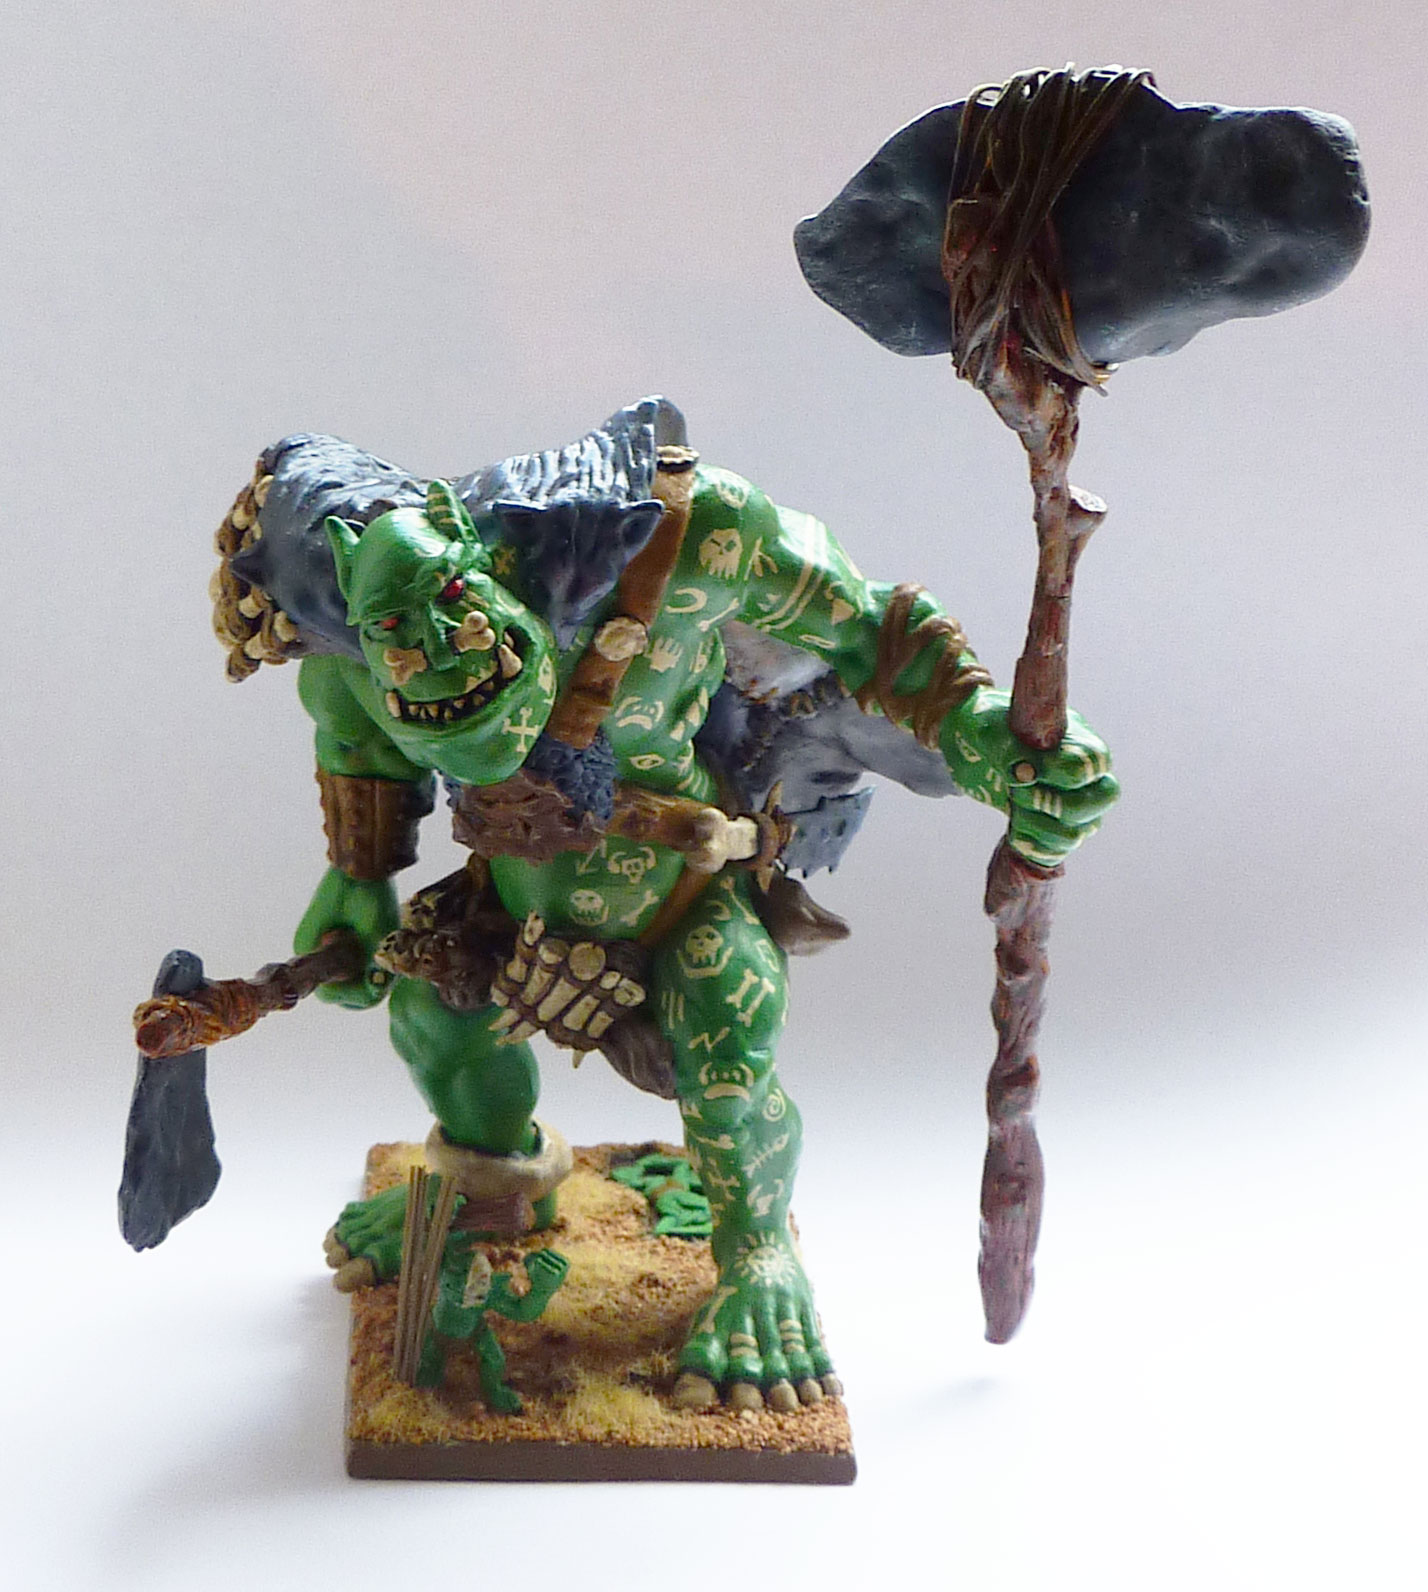 Savage Orc army - Giant